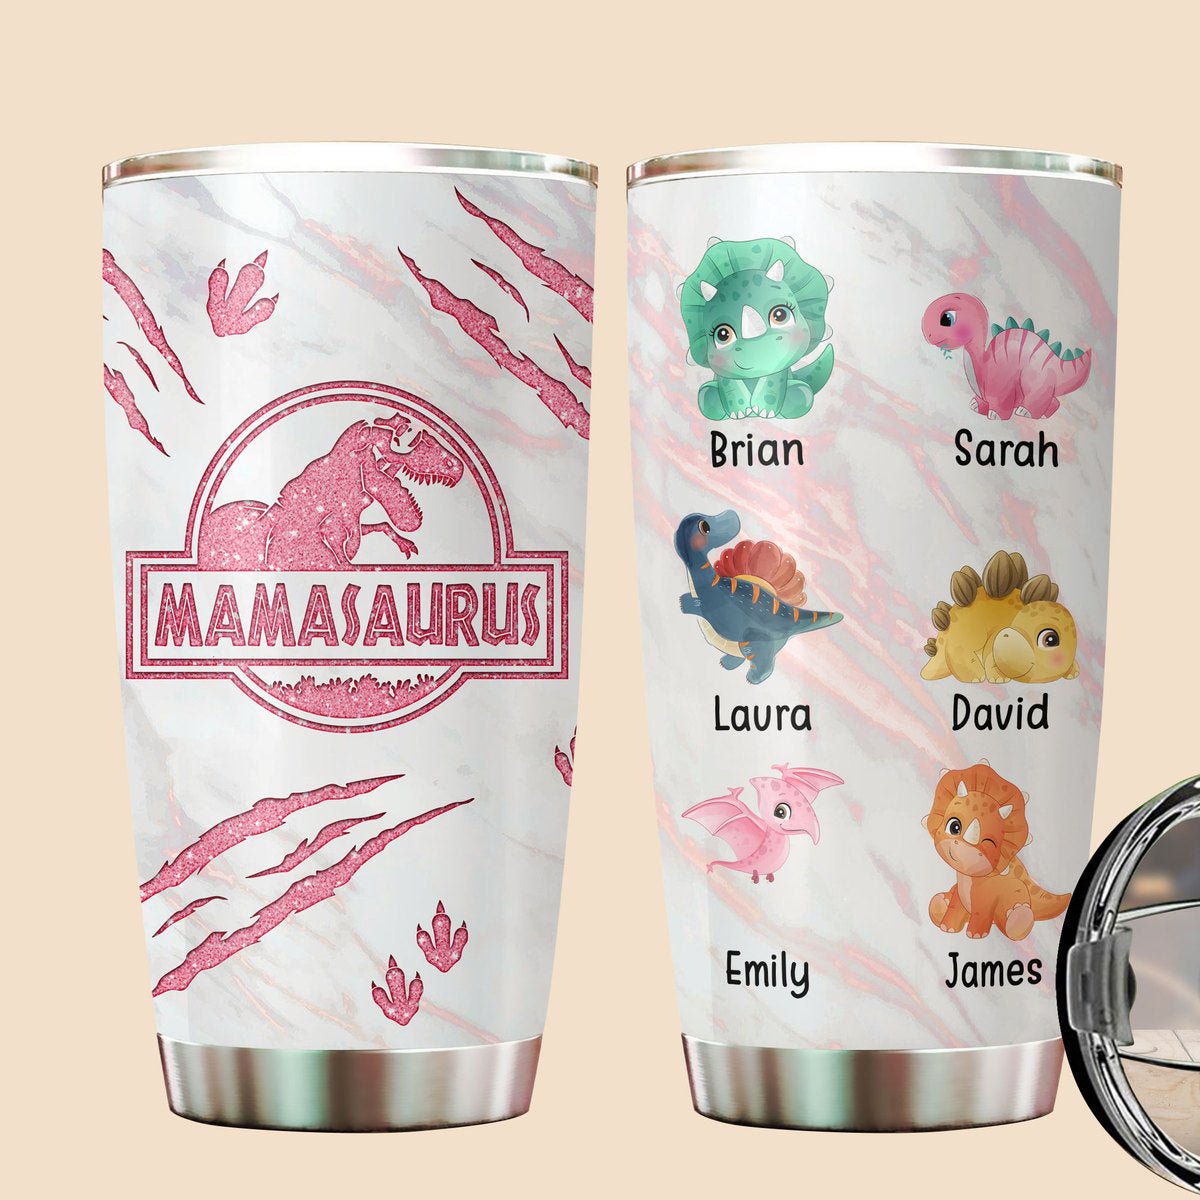 Mom Gifts, Mother's Day Gift for Mom Mamam New Mom, Mama Gifts, Funny Don't Mess with Mamasaurus 40 oz Tumbler with Handle